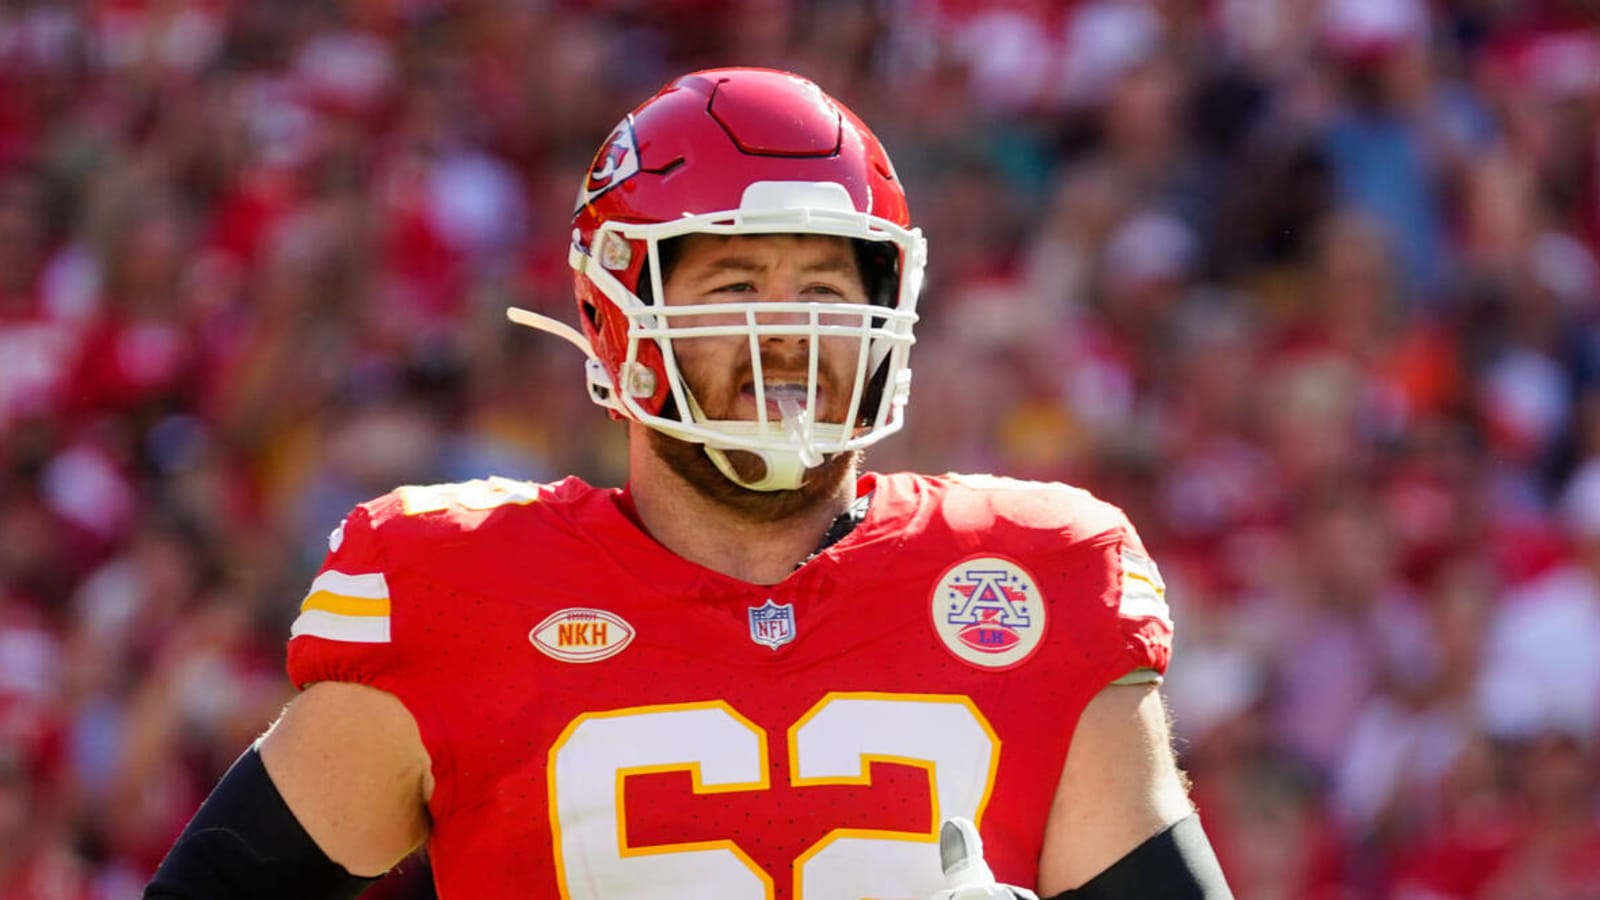 Andy Reid offers big injury update on key player ahead of Super Bowl